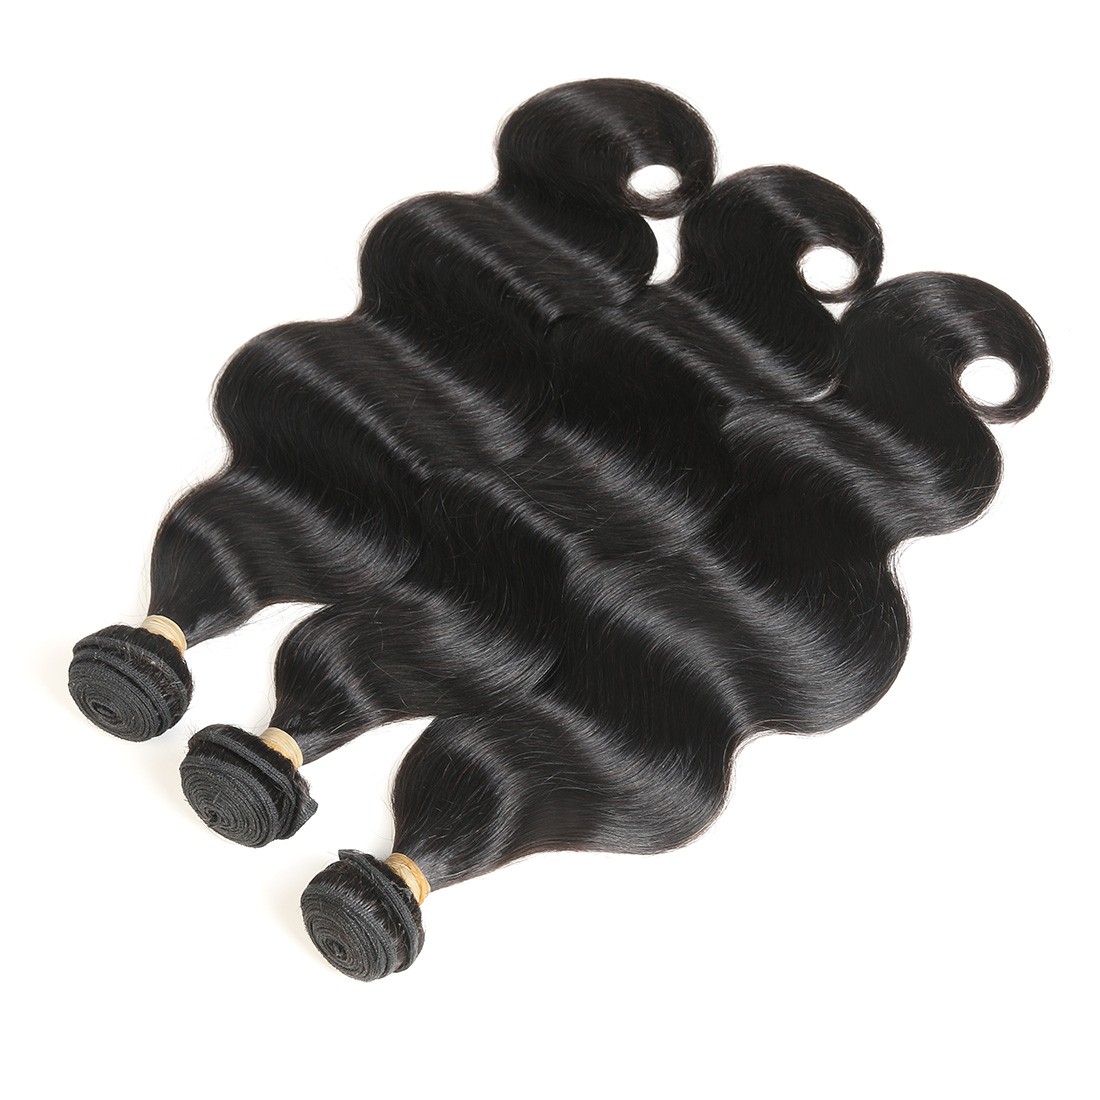 Raw Unprocessed Virgin Weft Hair Extension Suppliers China,China Supplier 22 24 26 28 Body Wave Human Hair Weave